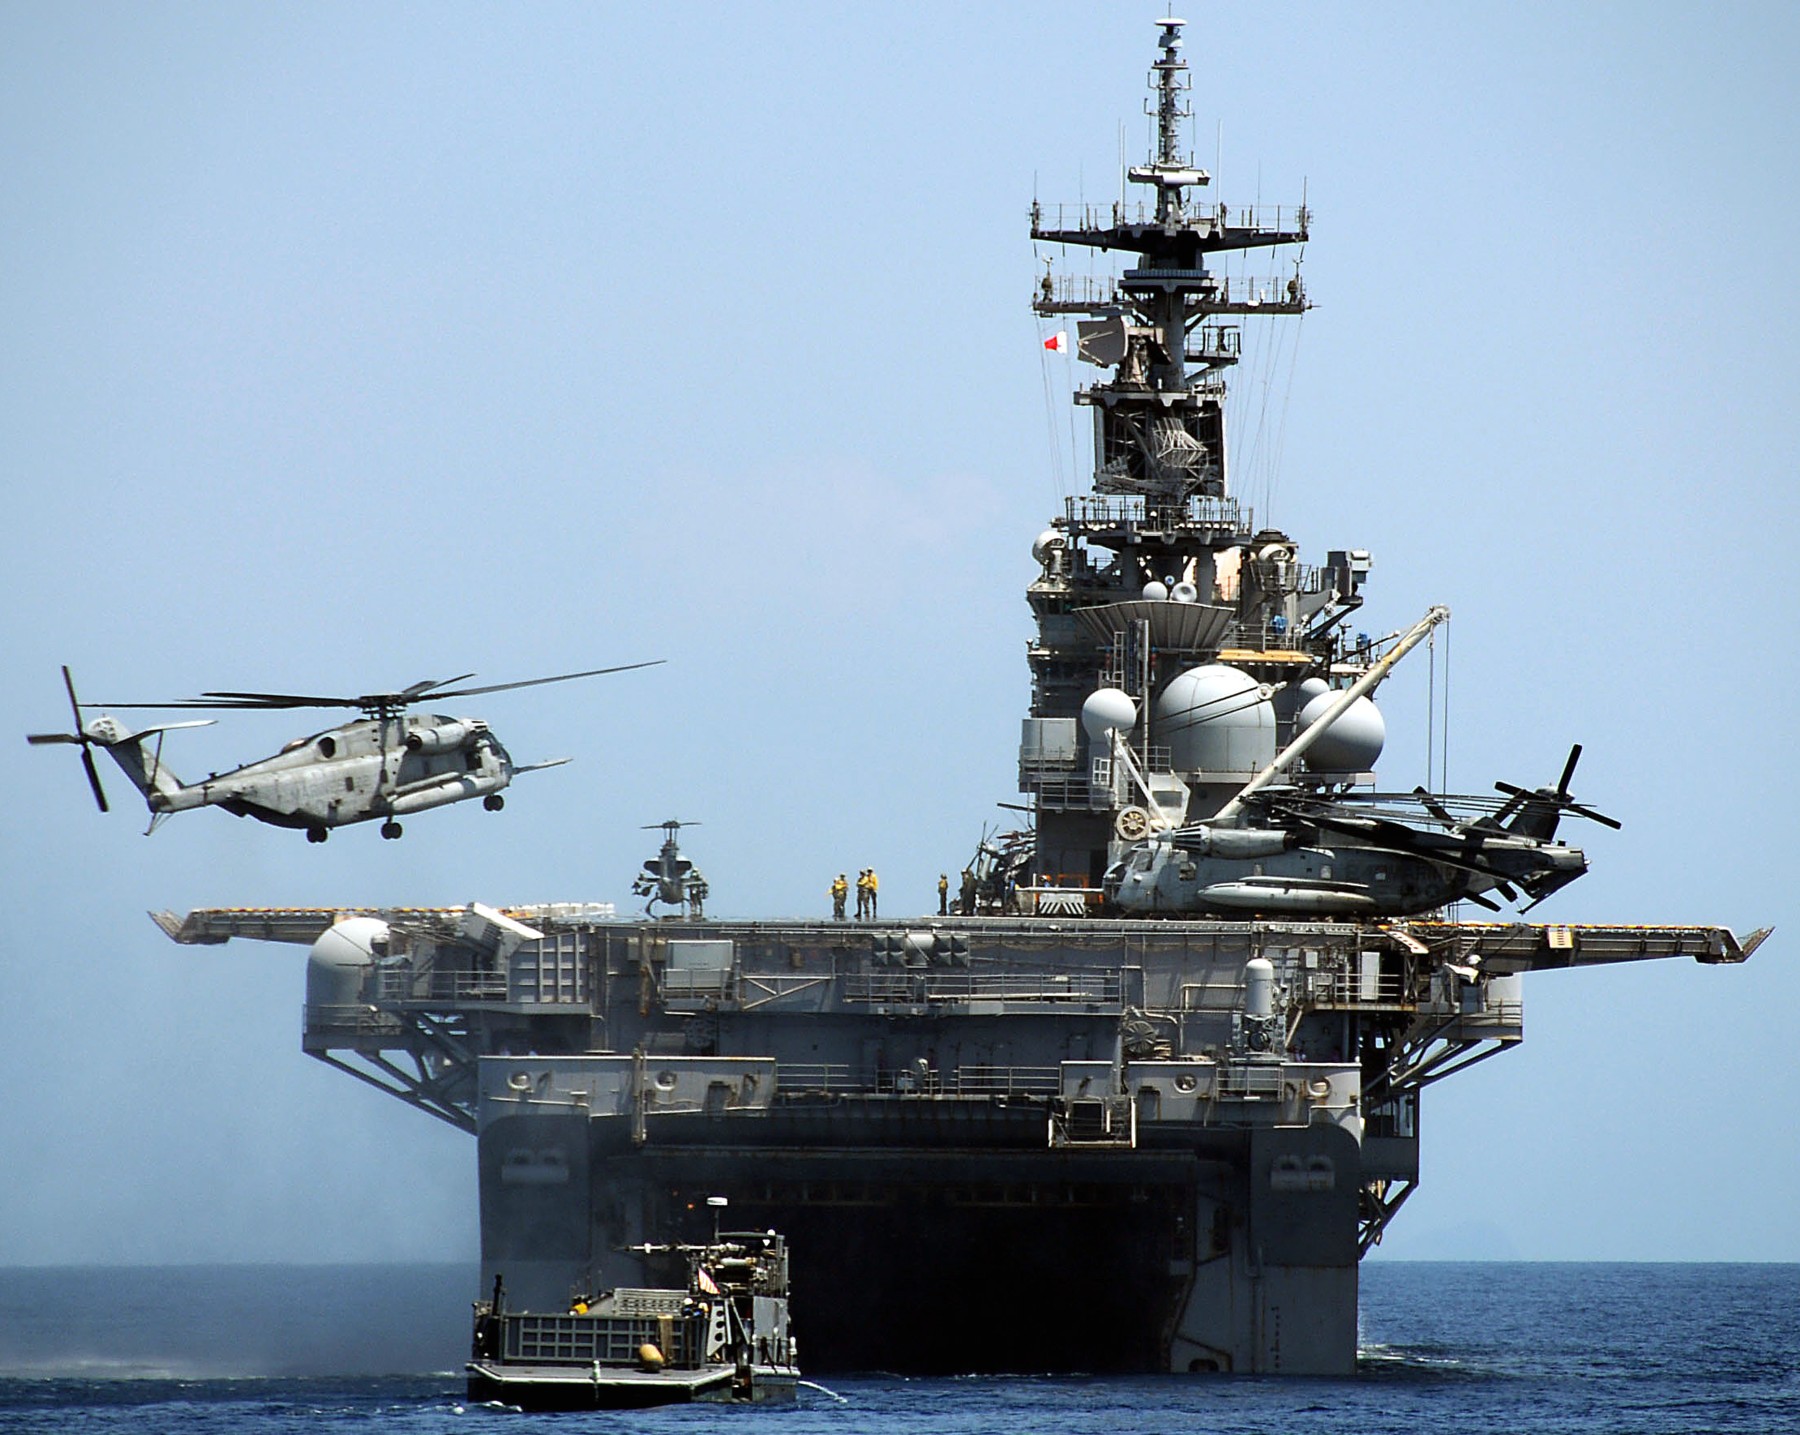 lhd-2 uss essex wasp class amphibious assault ship landing helicopter us navy marines hmm-262 south china sea 68